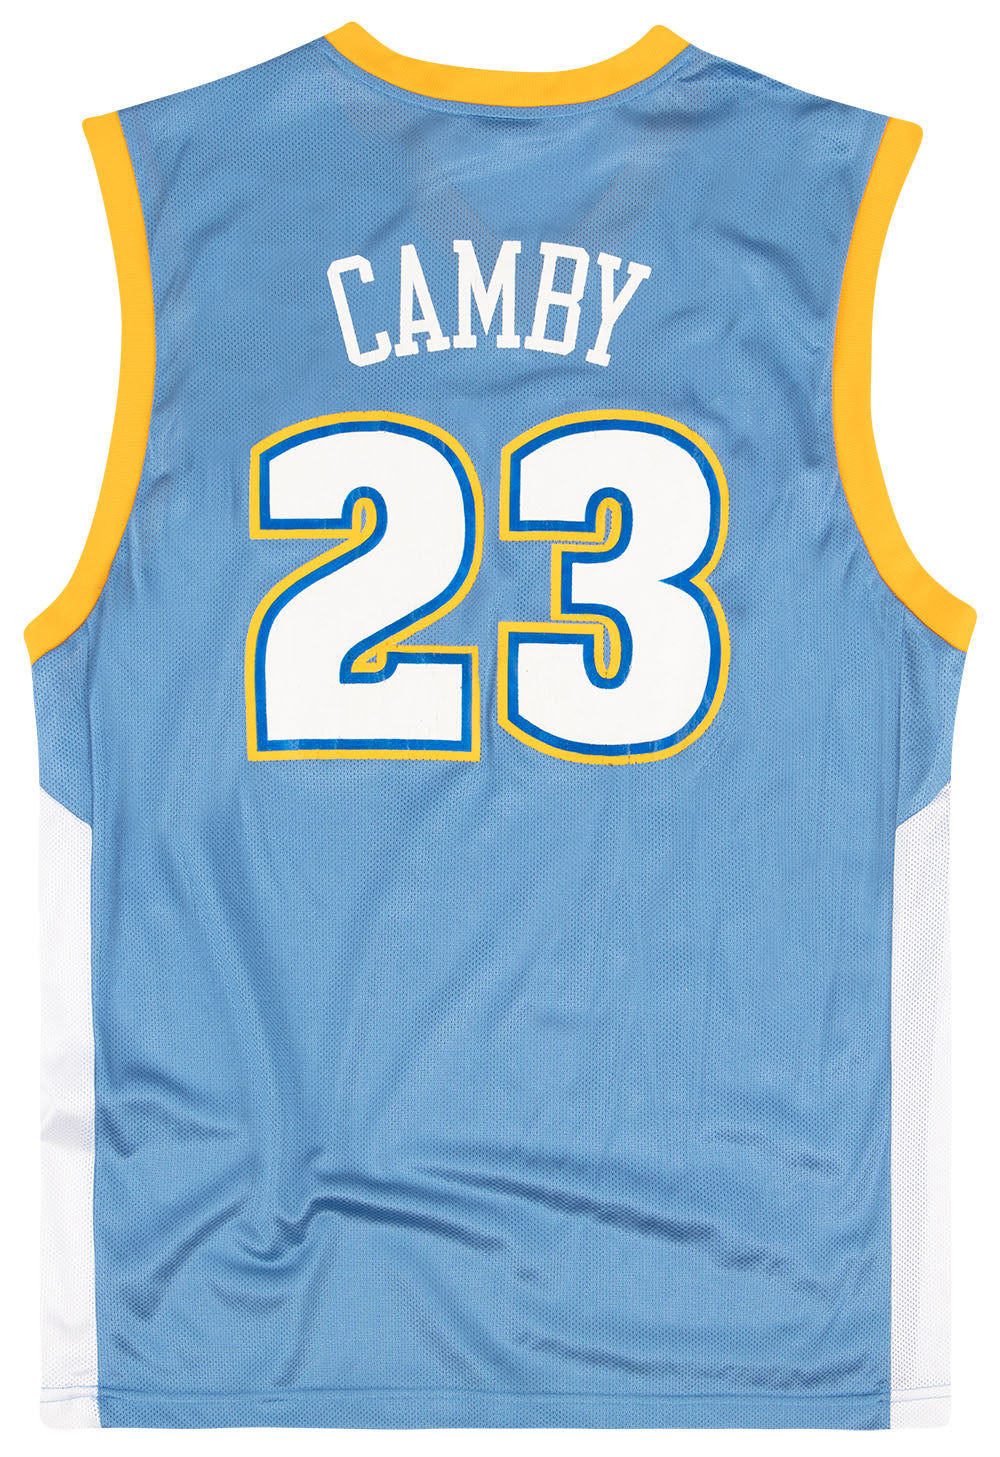 2006-08 DENVER NUGGETS CAMBY #23 ADIDAS JERSEY (AWAY) L